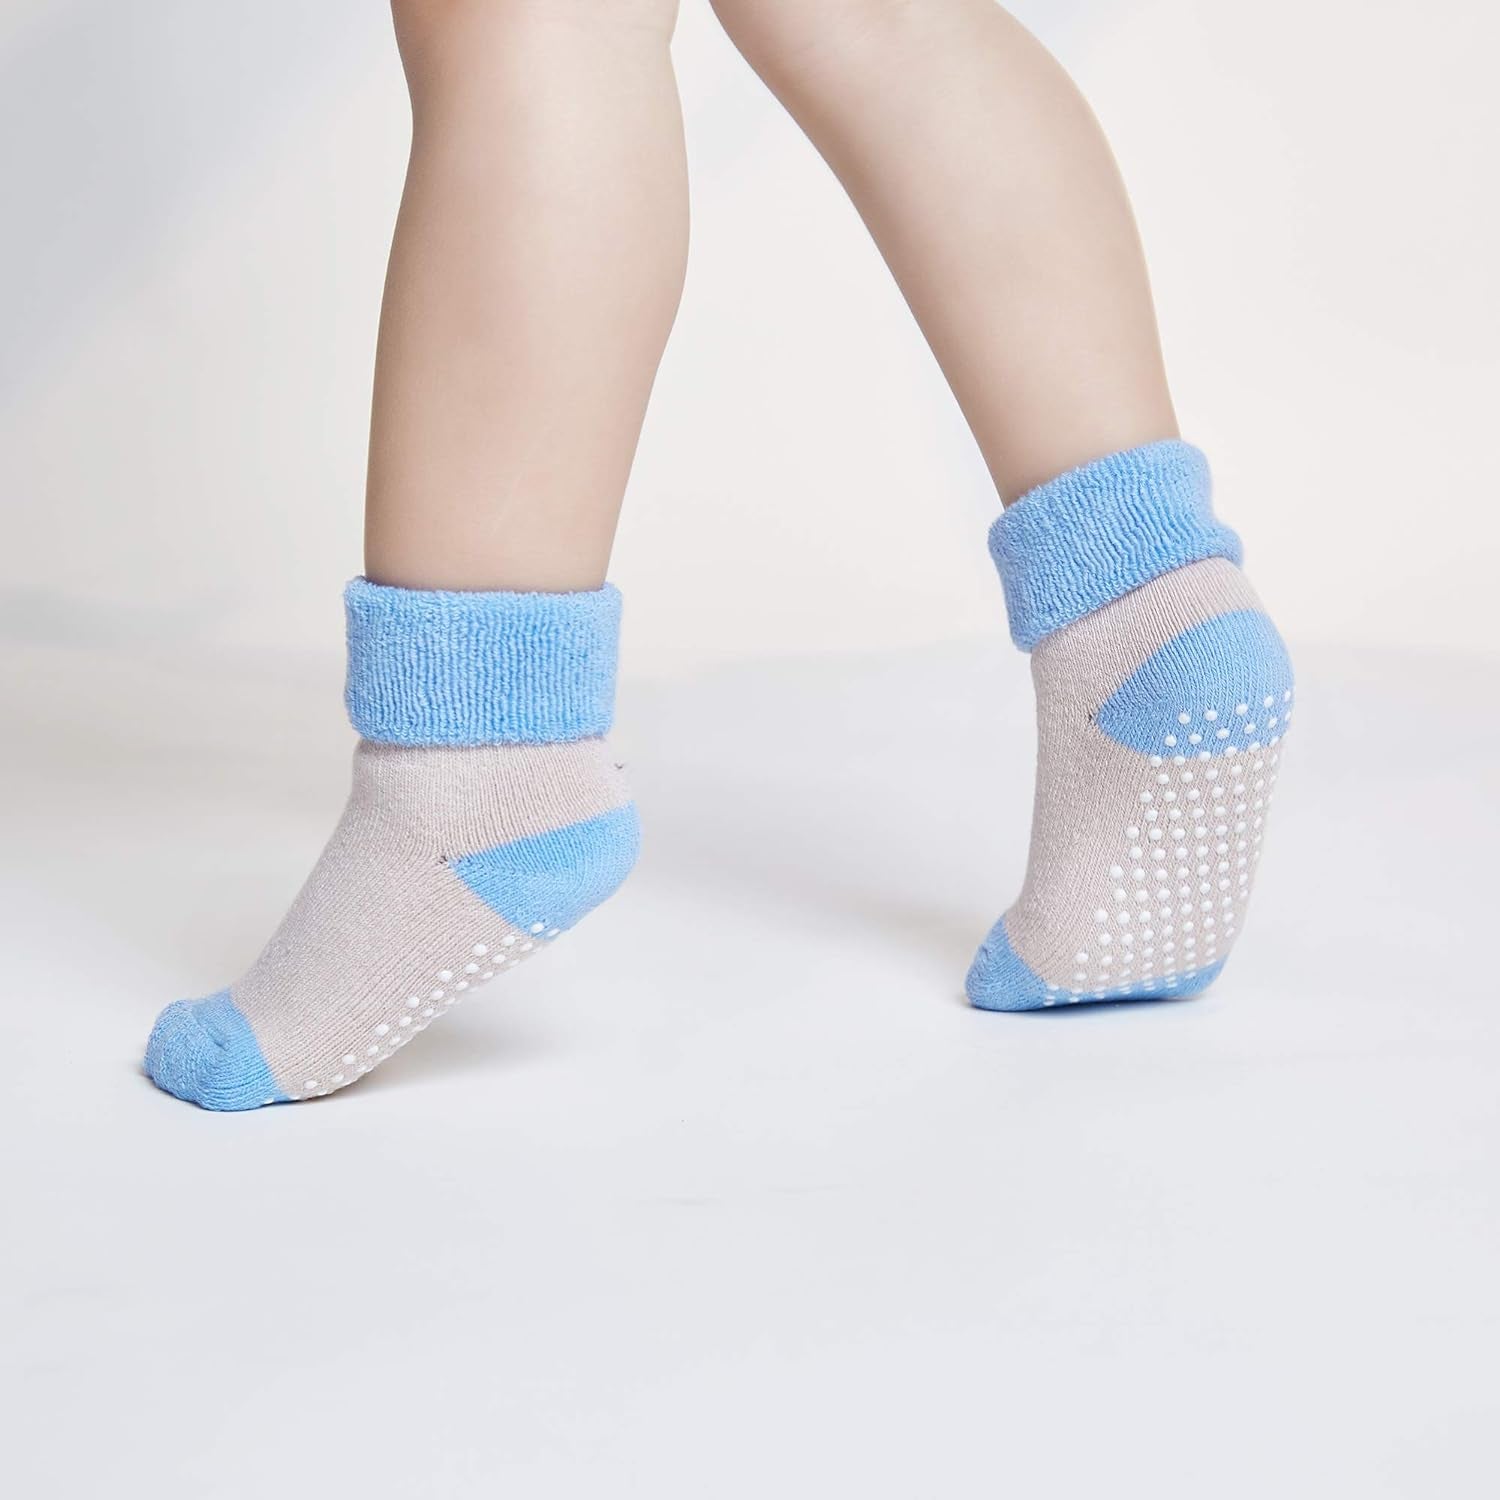 Baby Toddler Kids Ankle Crew Socks with Grips Unisex Warm Thick Cotton Winter Socks 0-10T 6/8 Pack